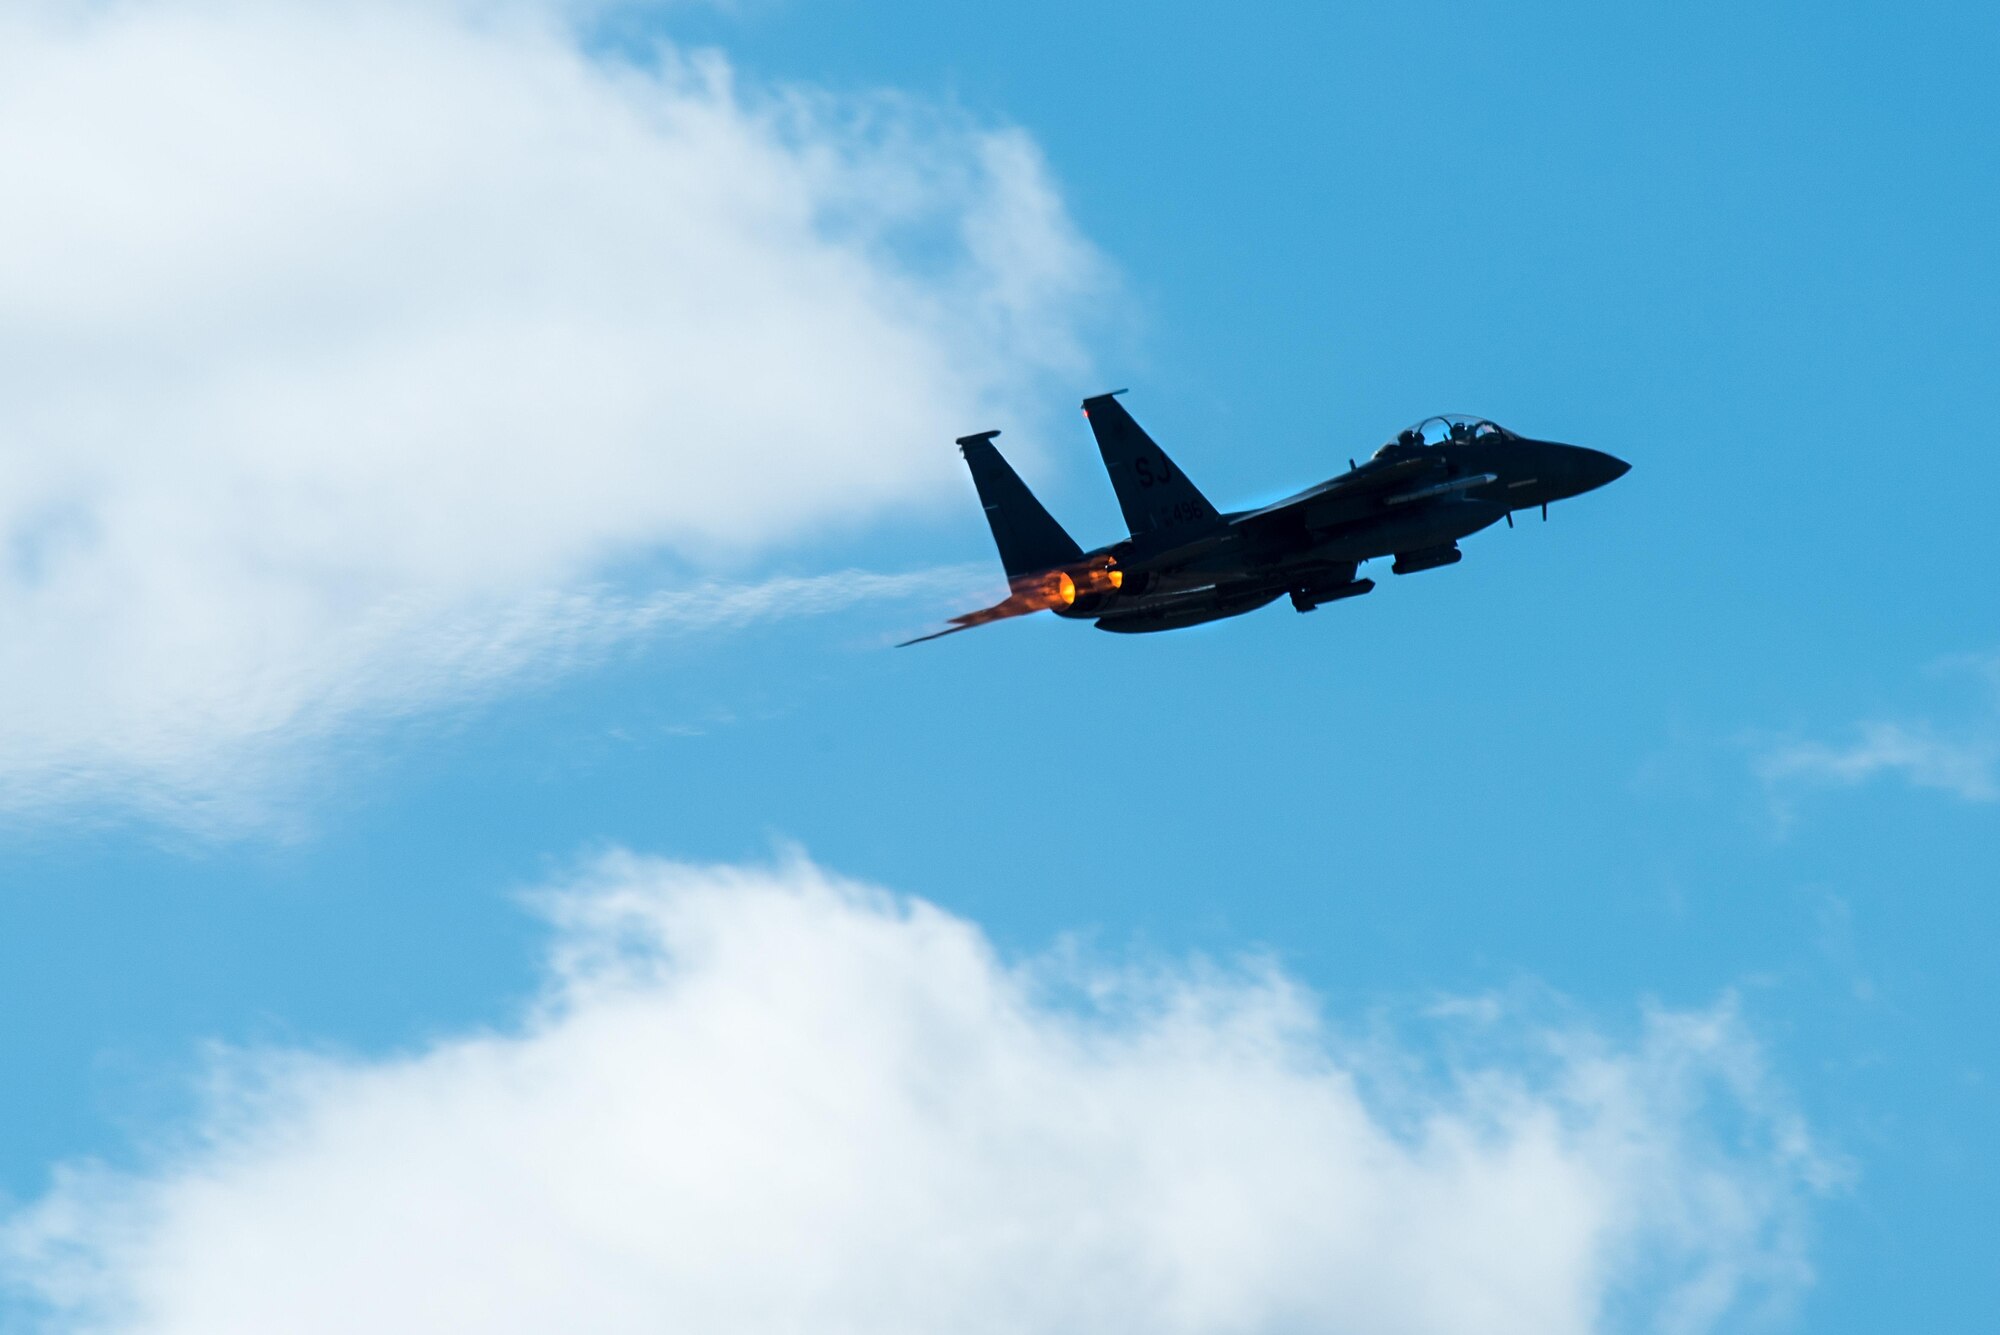 An F-15E Strike Eagle from the 335th Fighter Squadron takes off during exercise Coronet Warrior 17-01, Jan. 30, 2017, at Seymour Johnson Air Force Base, North Carolina. Multiple aircraft participated in the expeditionary exercise to sharpen their skills to support contingency operations in hostile environments overseas. (U.S. Air Force photo by Airman Shawna L. Keyes)